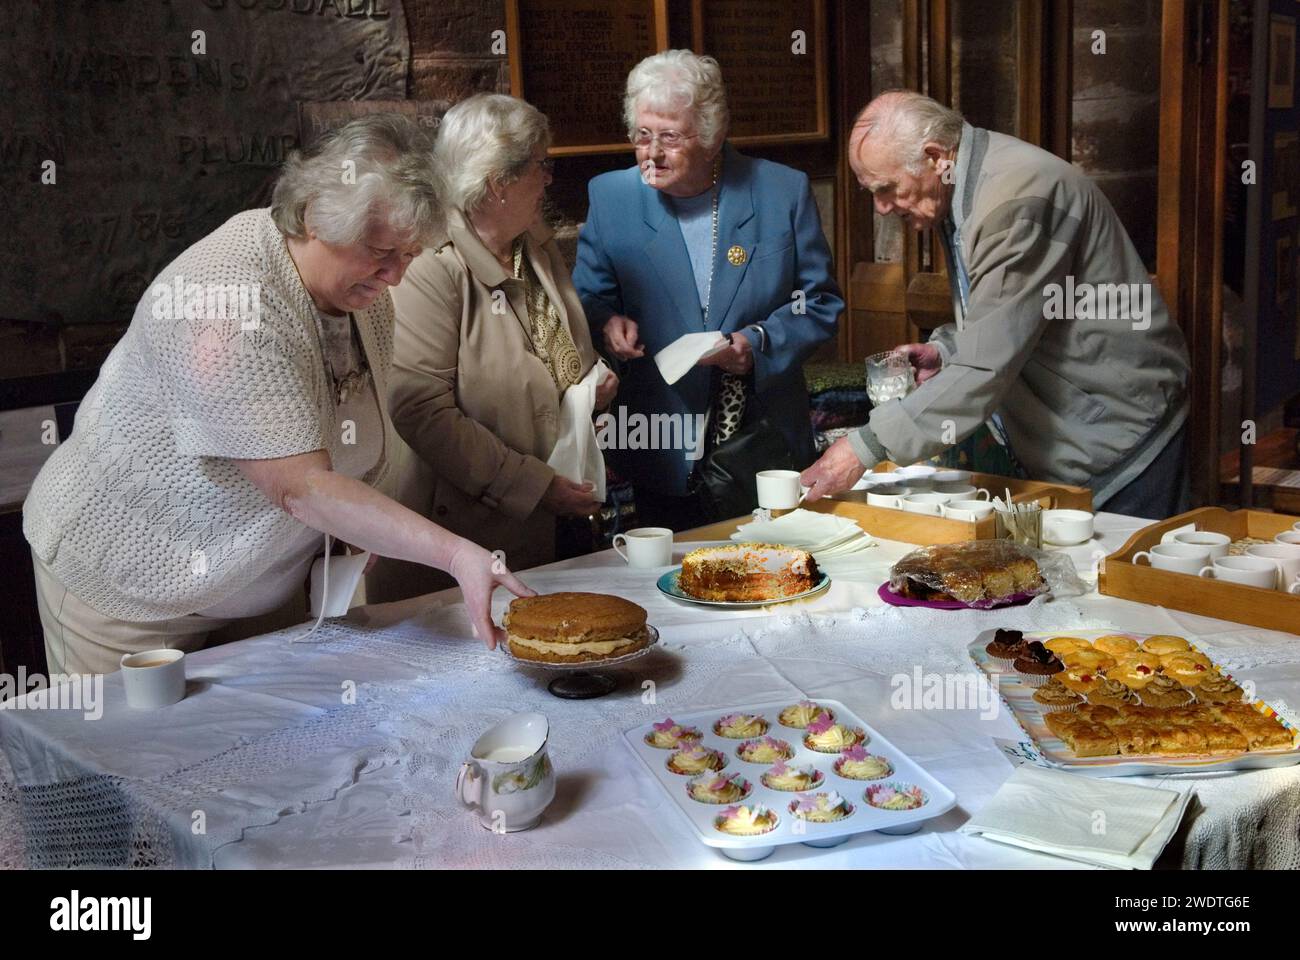 English village life UK 2010s members of the Parish Church of St Peter Edgmond, Shropshire prepare the tea and home made cakes to be consumes after the annual church service  at the Parish Church of St Peter, after the Clipping ceremony. Shropshire 2015 England HOMER SYKES. Stock Photo